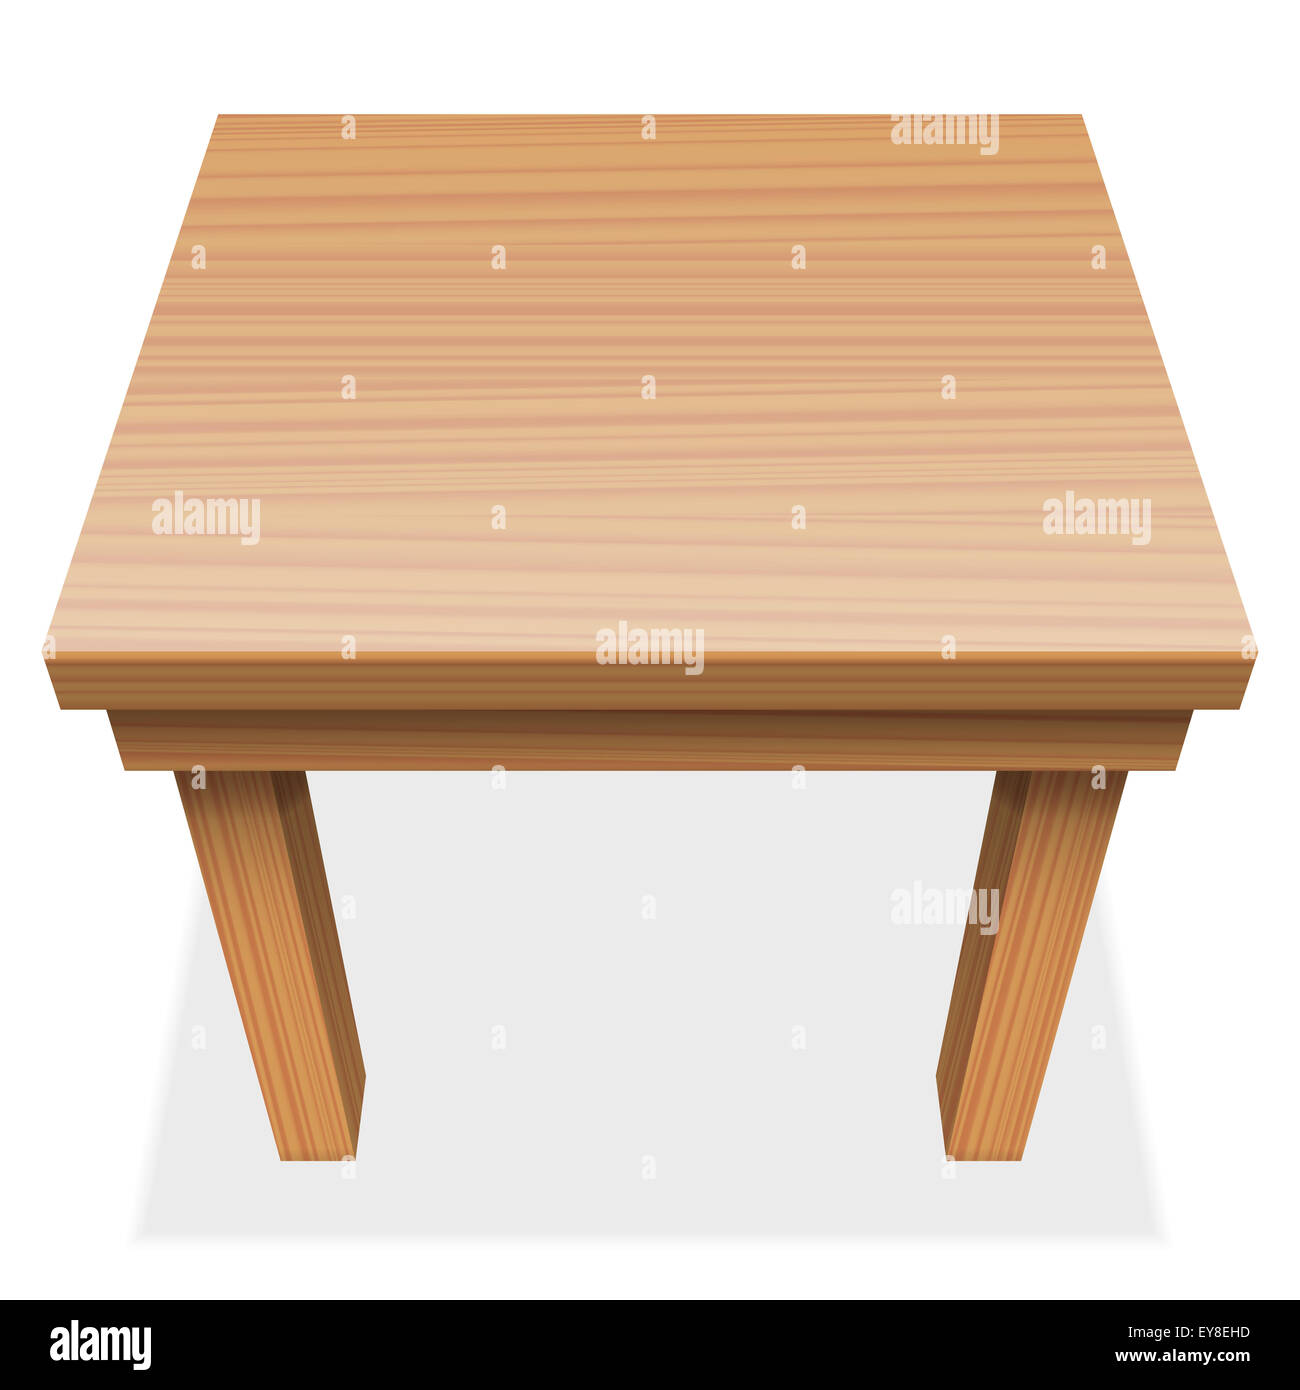 Wooden table - perspective view from above - illustration on white background. Stock Photo